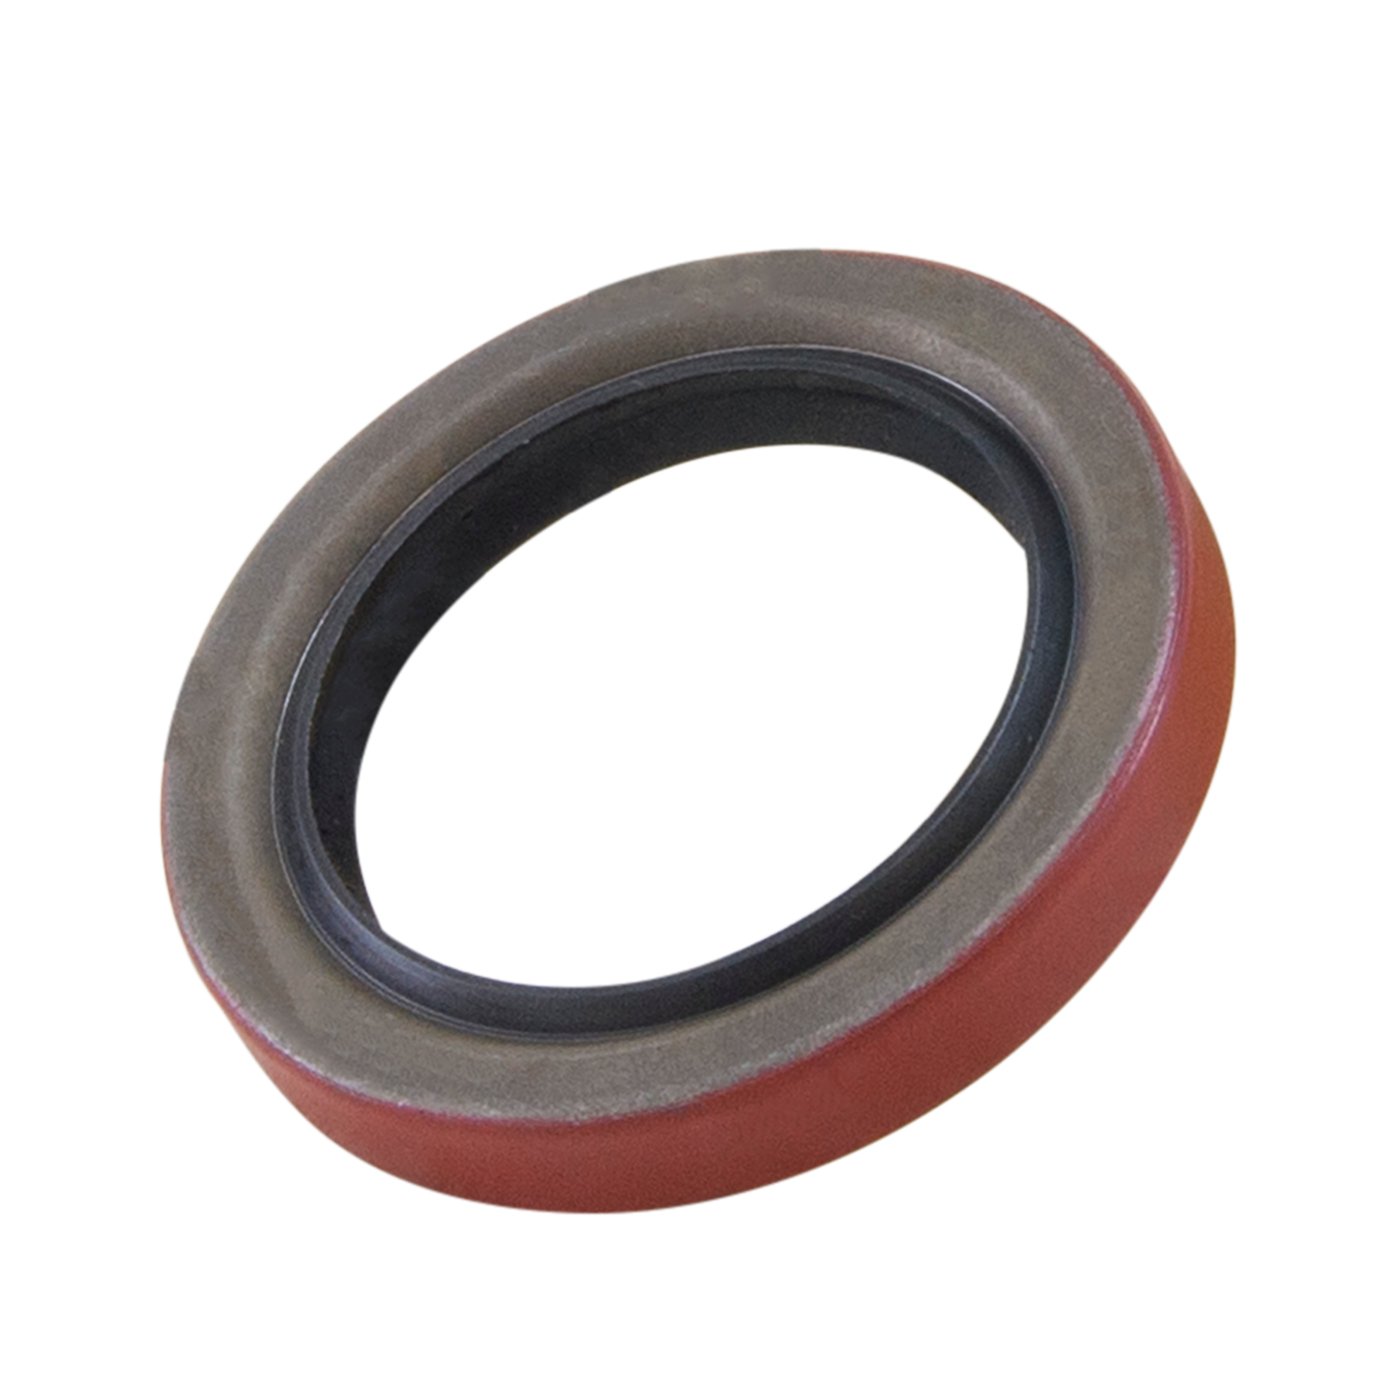 Side Yoke Axle Replacement Seal For Dana 44 Ica Vette And Viper